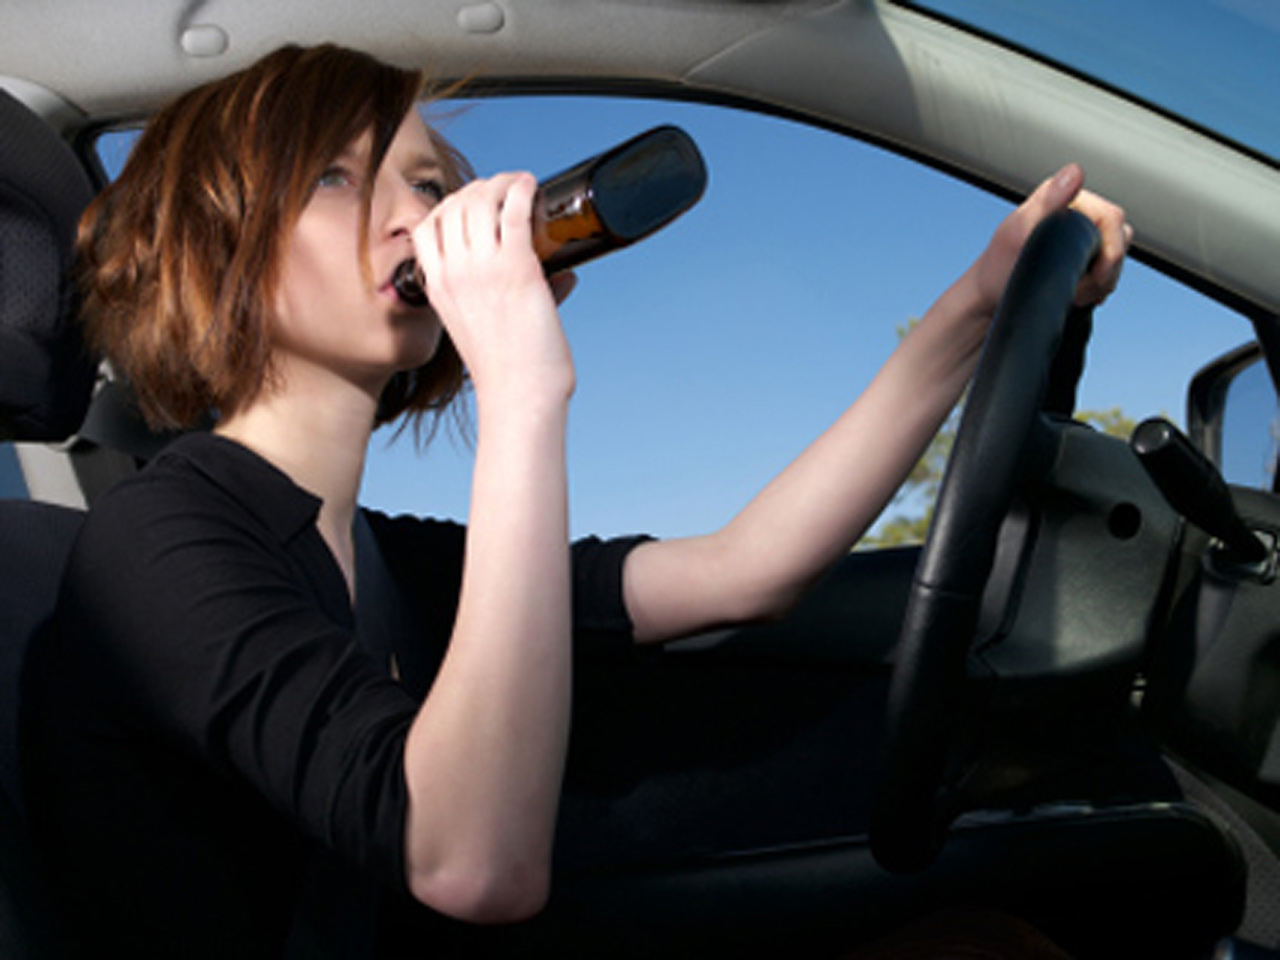 About teen drinking and driving